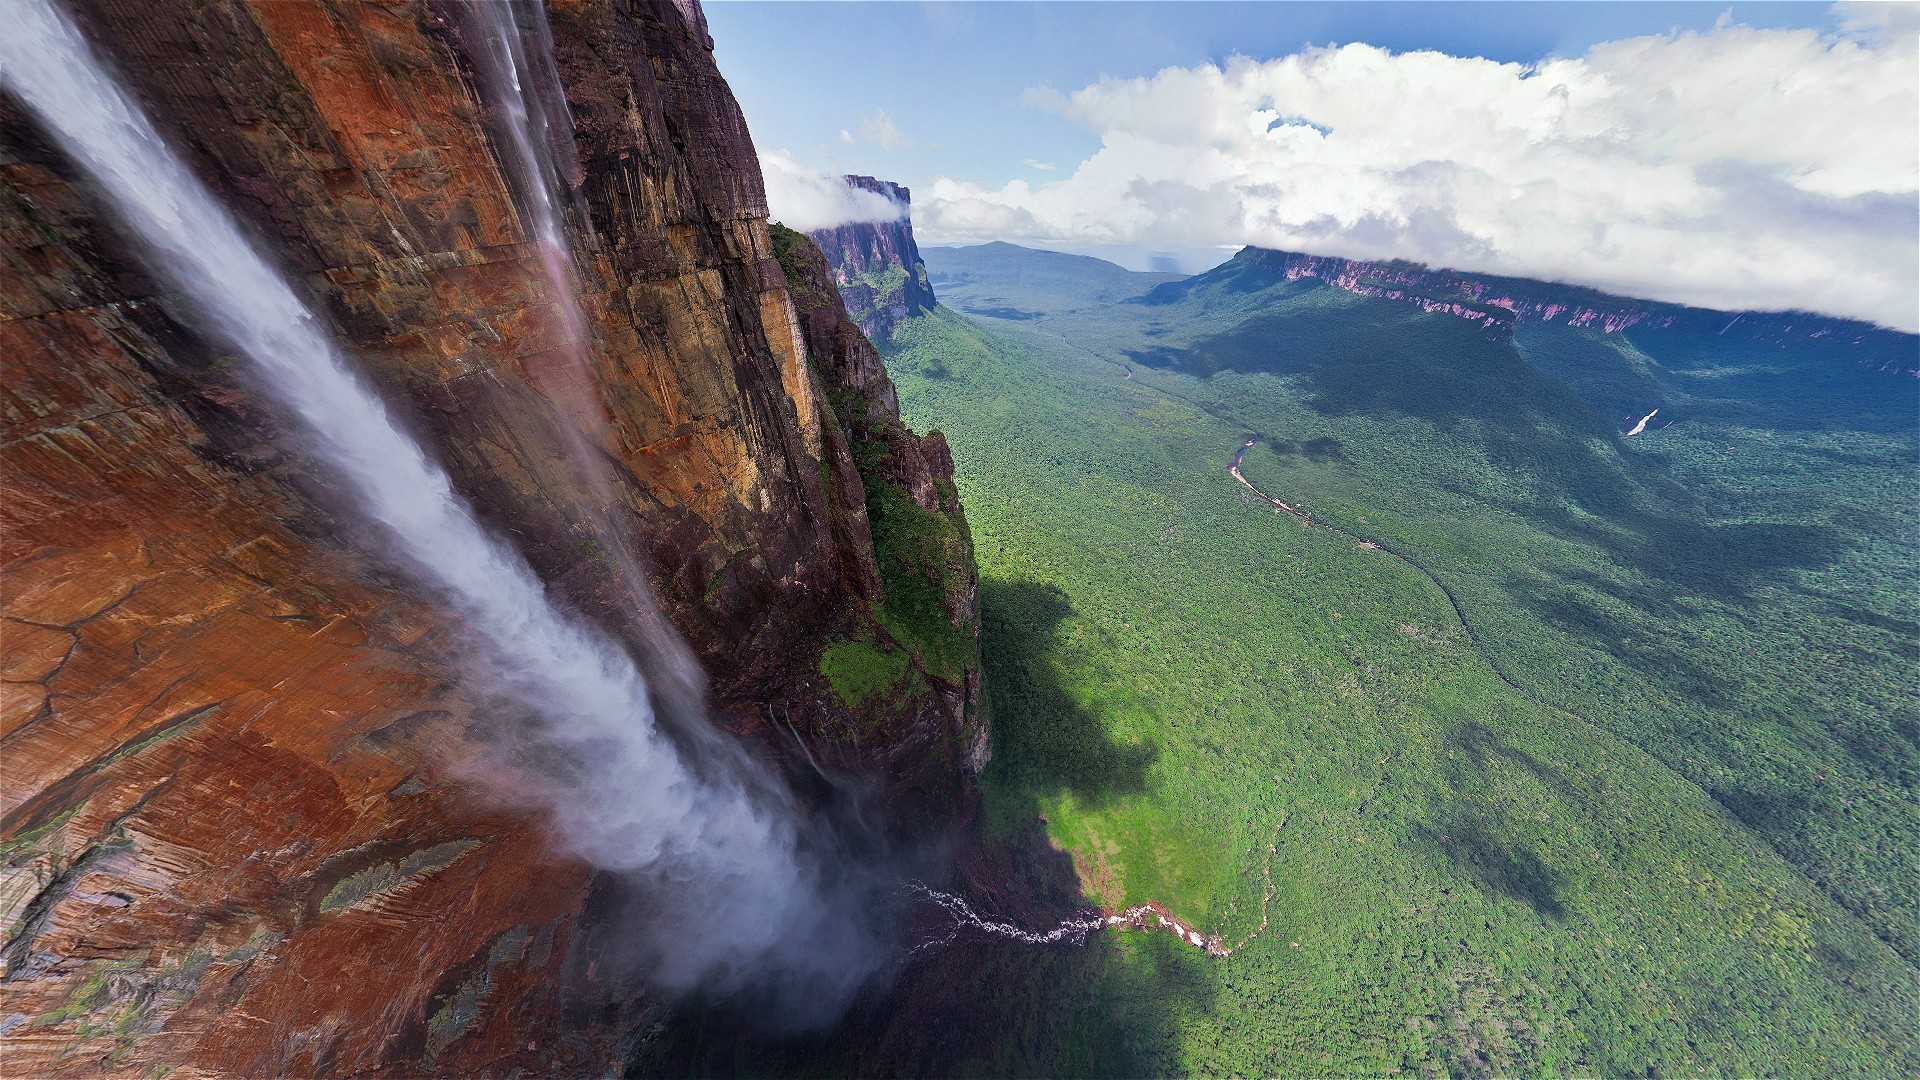 General 1920x1080 cliff waterfall tropical rocks clouds trees landscape Salto Ángel  Angel Falls canyon Venezuela nature mountains rock formation Mount Roraima South America